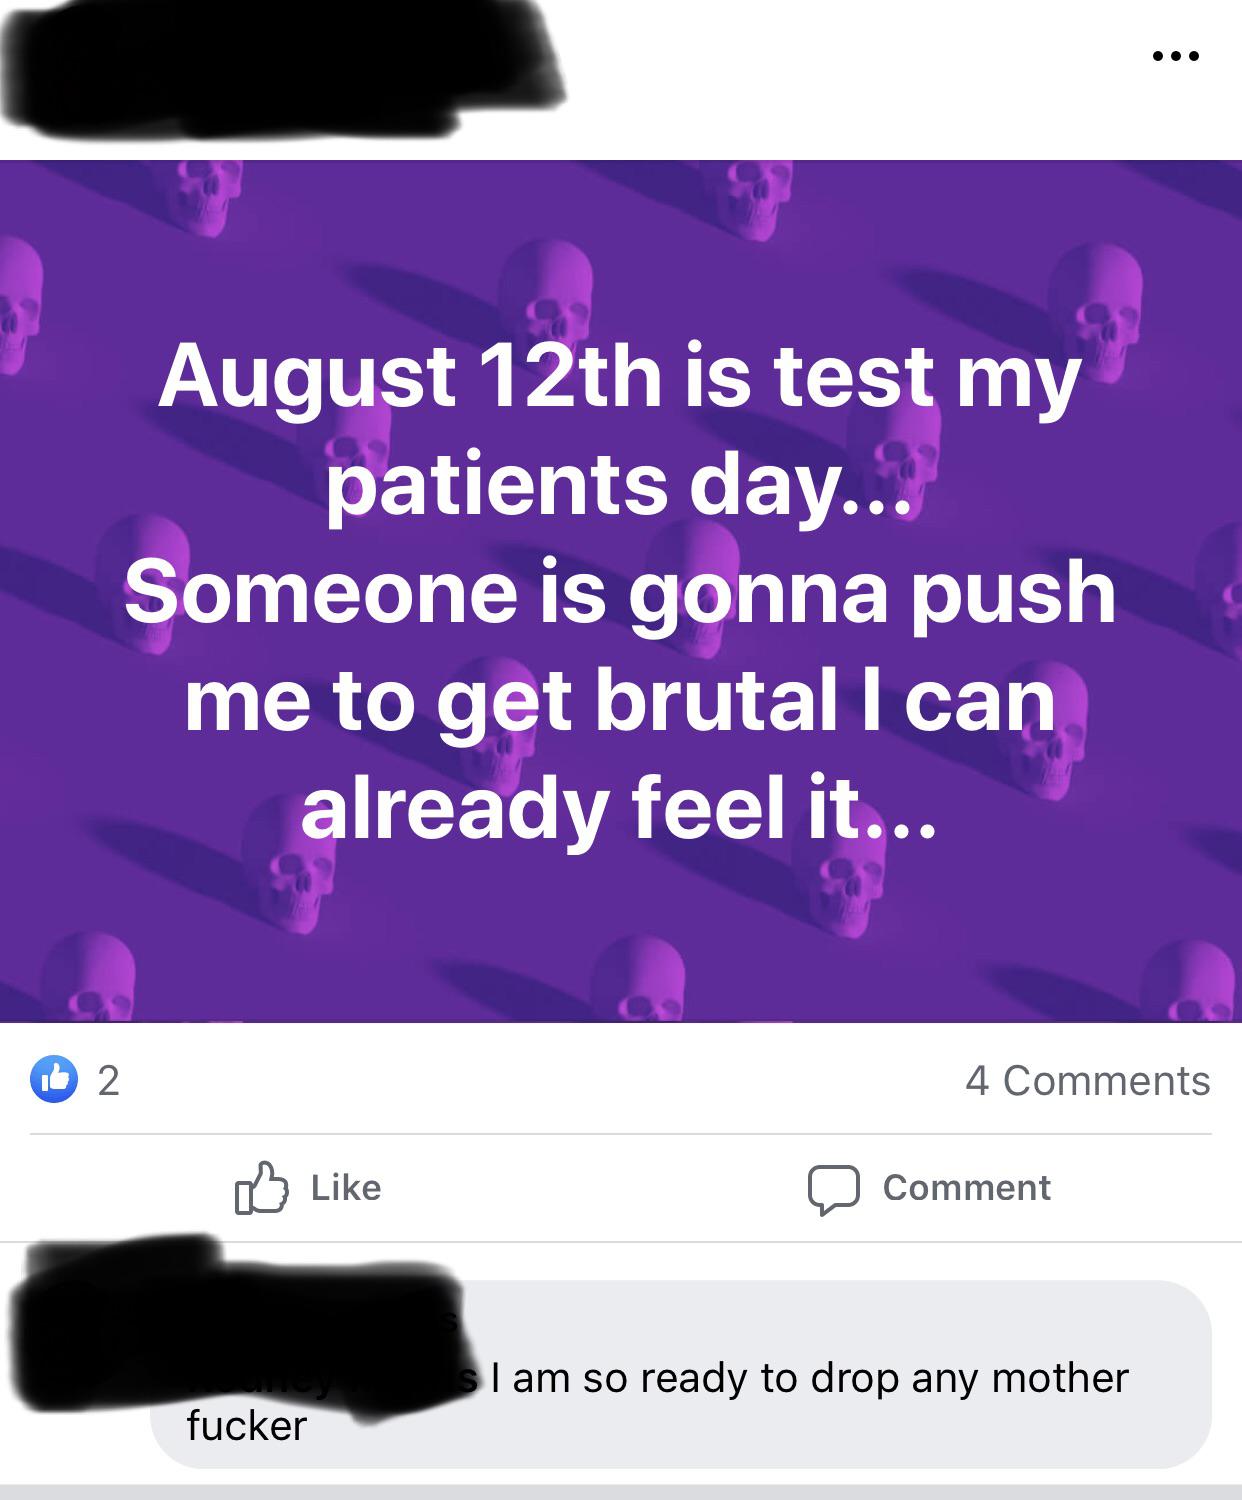 reflexion de la vida - August 12th is test my patients day... Someone is gonna push me to get brutal I can already feel it... 2 4 0 Comment I am so ready to drop any mother fucker